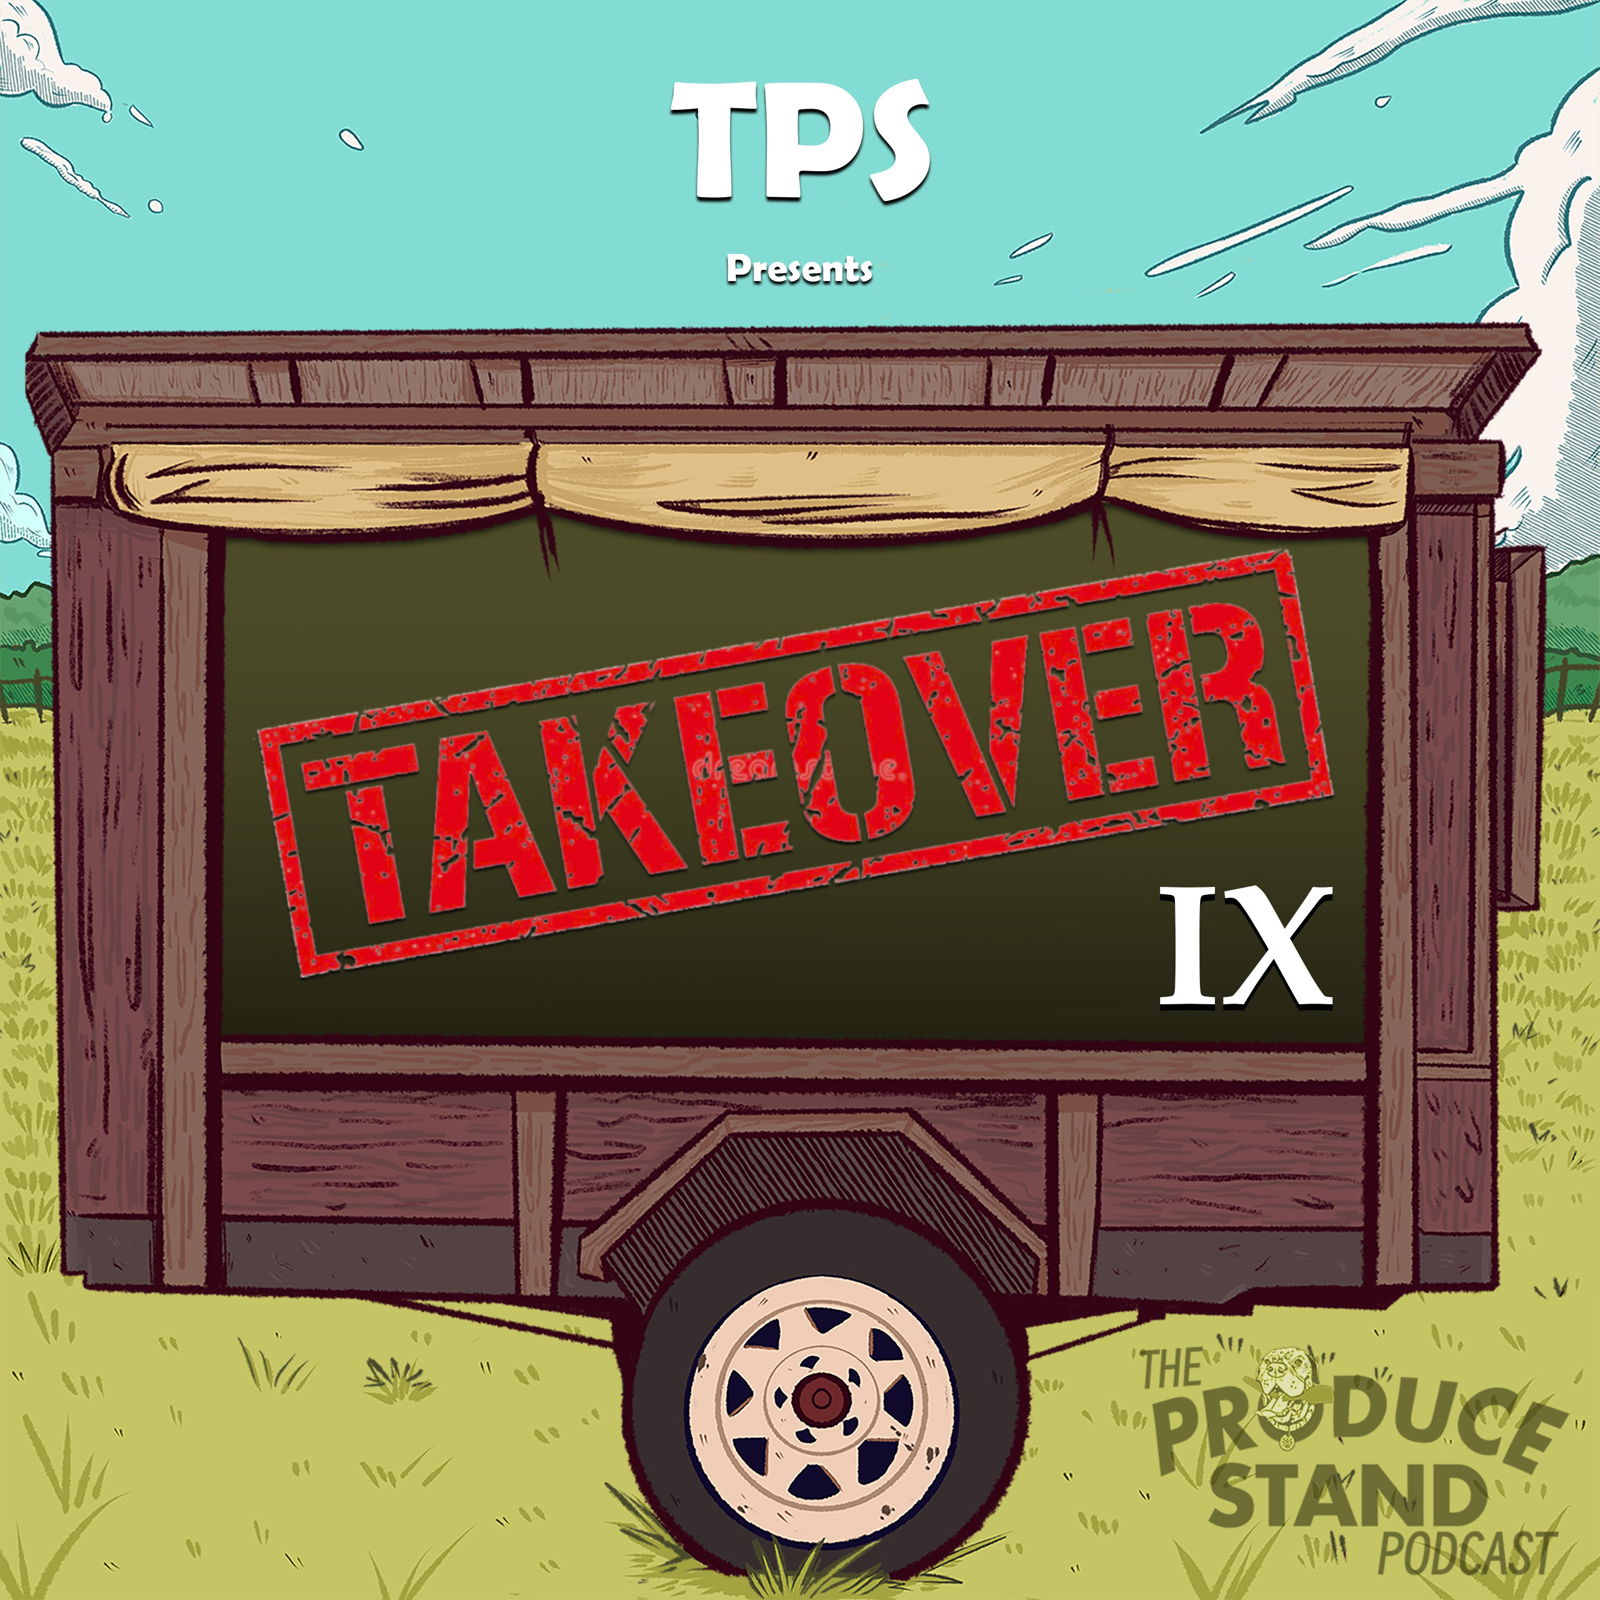 Episode cover art for TPS244: Takeover IX